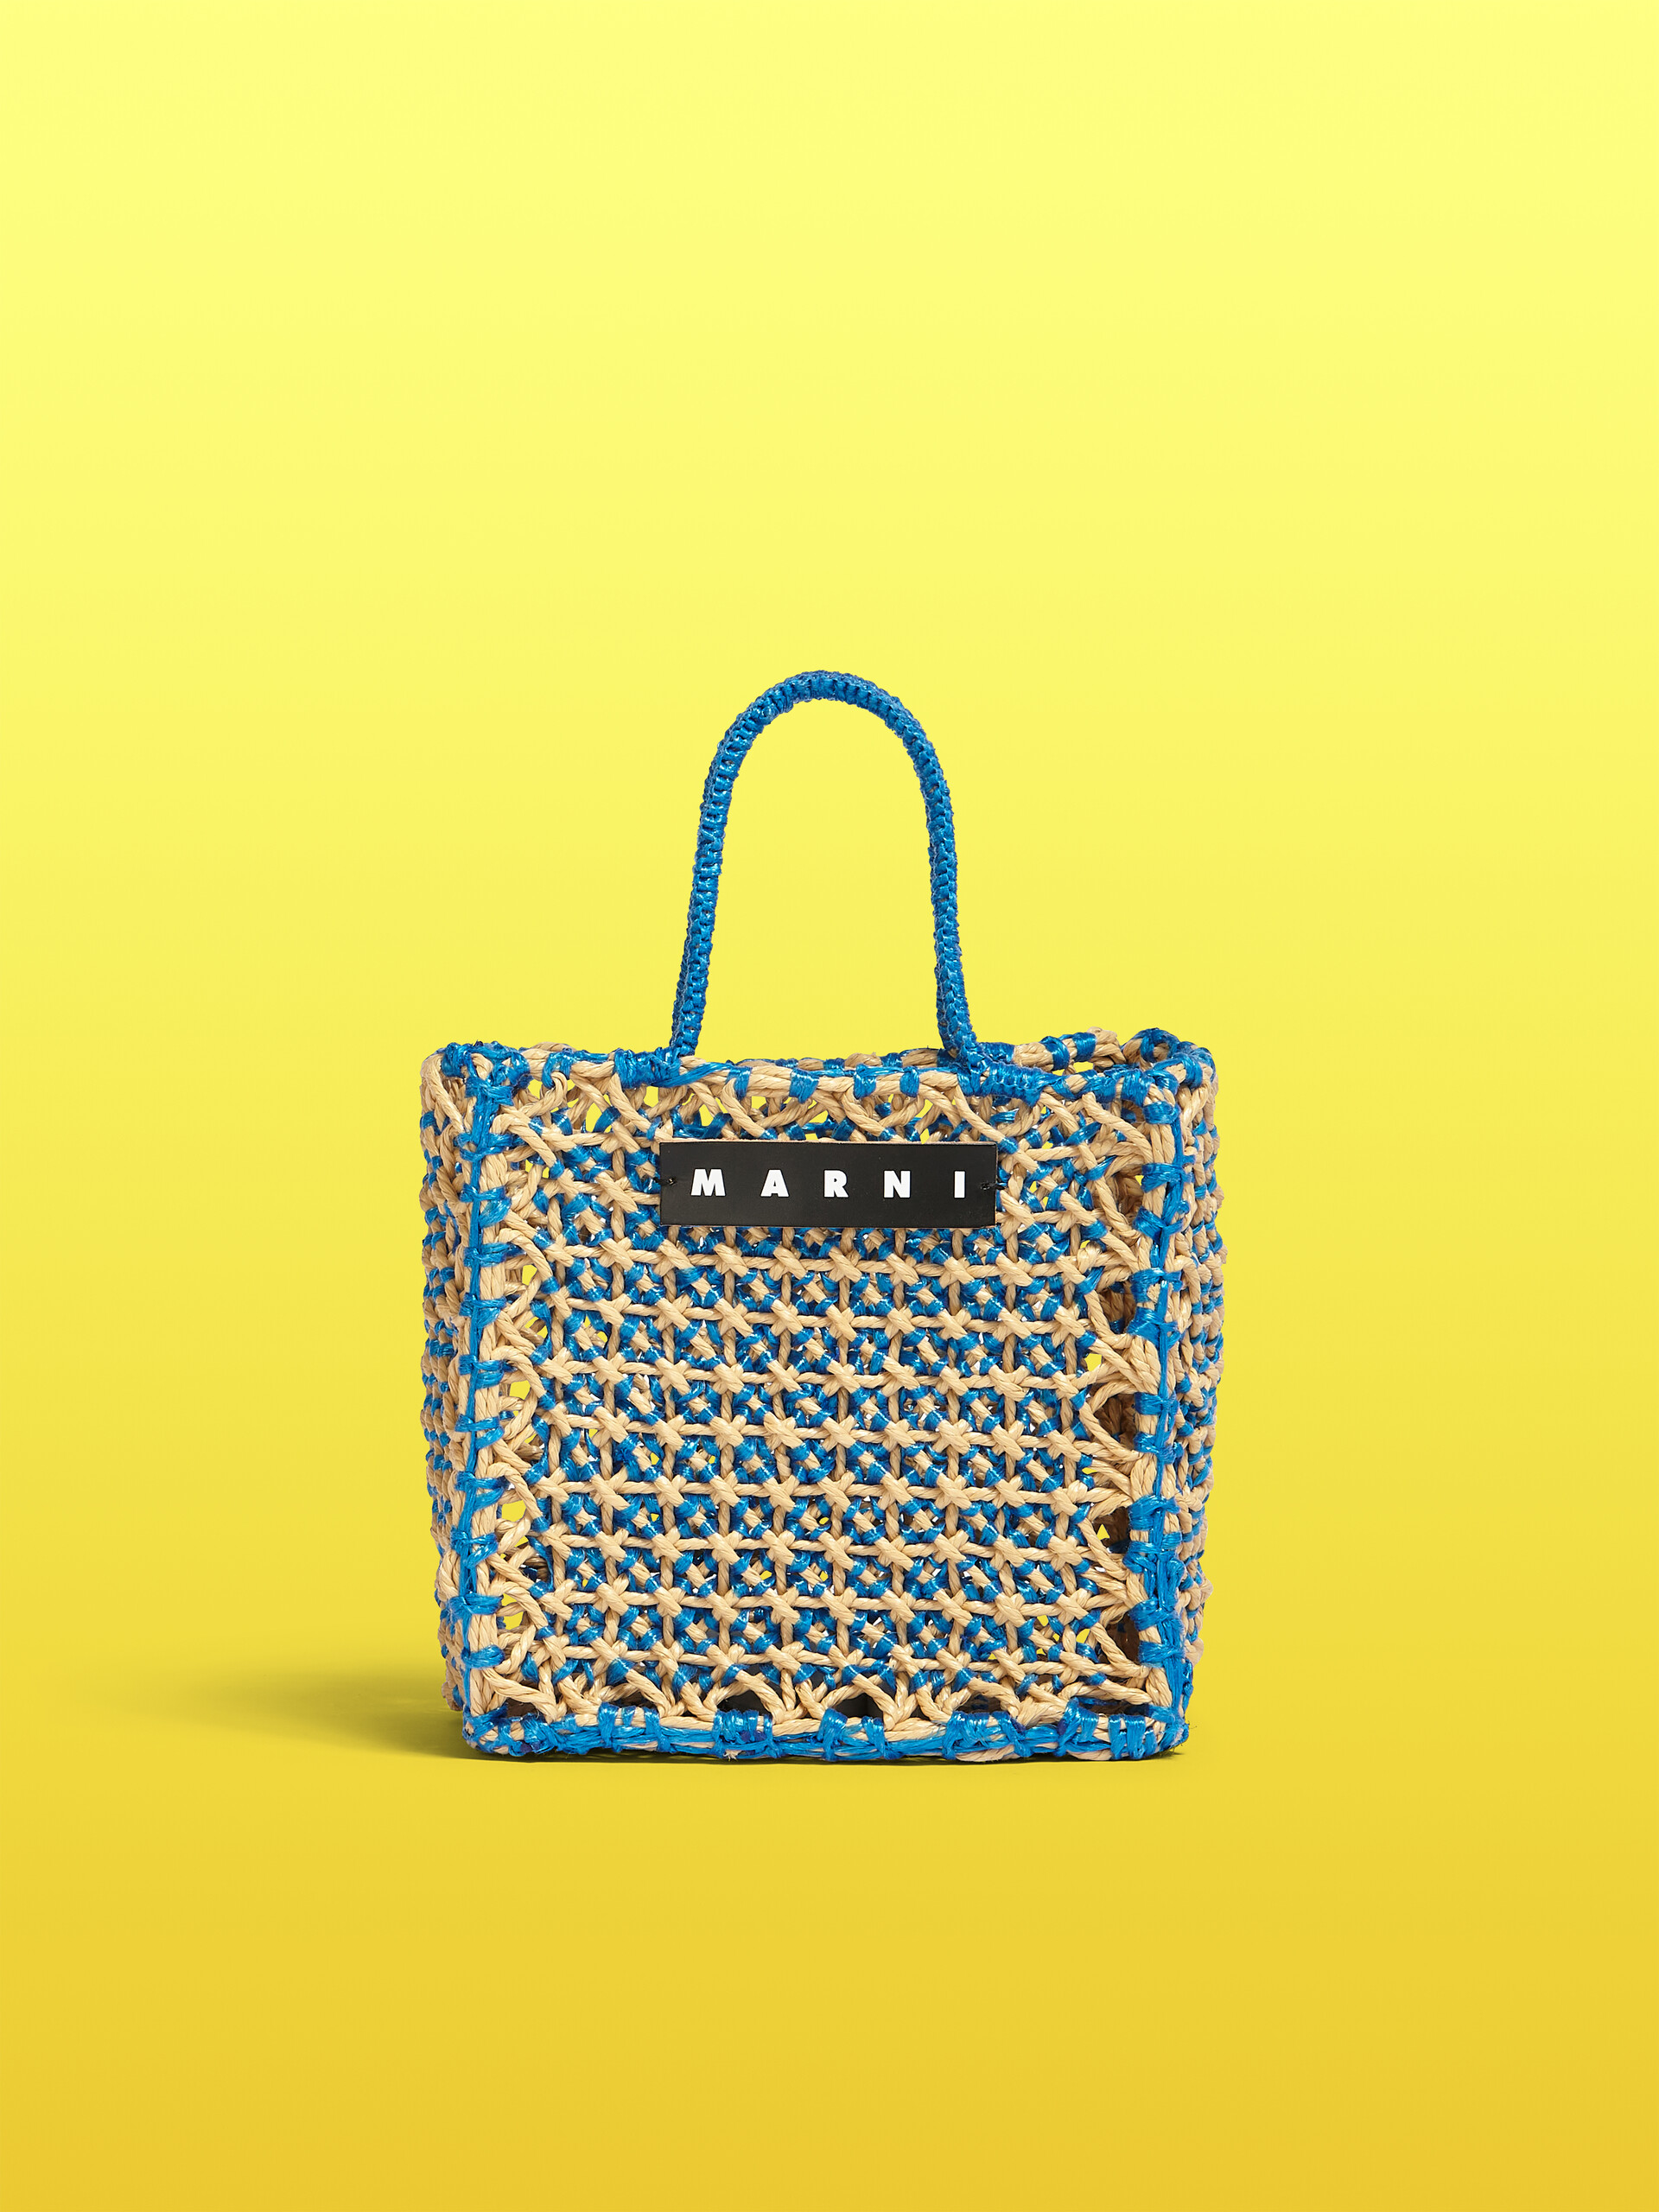 MARNI MARKET JURTA small bag in pale blue and beige crochet - Shopping Bags - Image 1